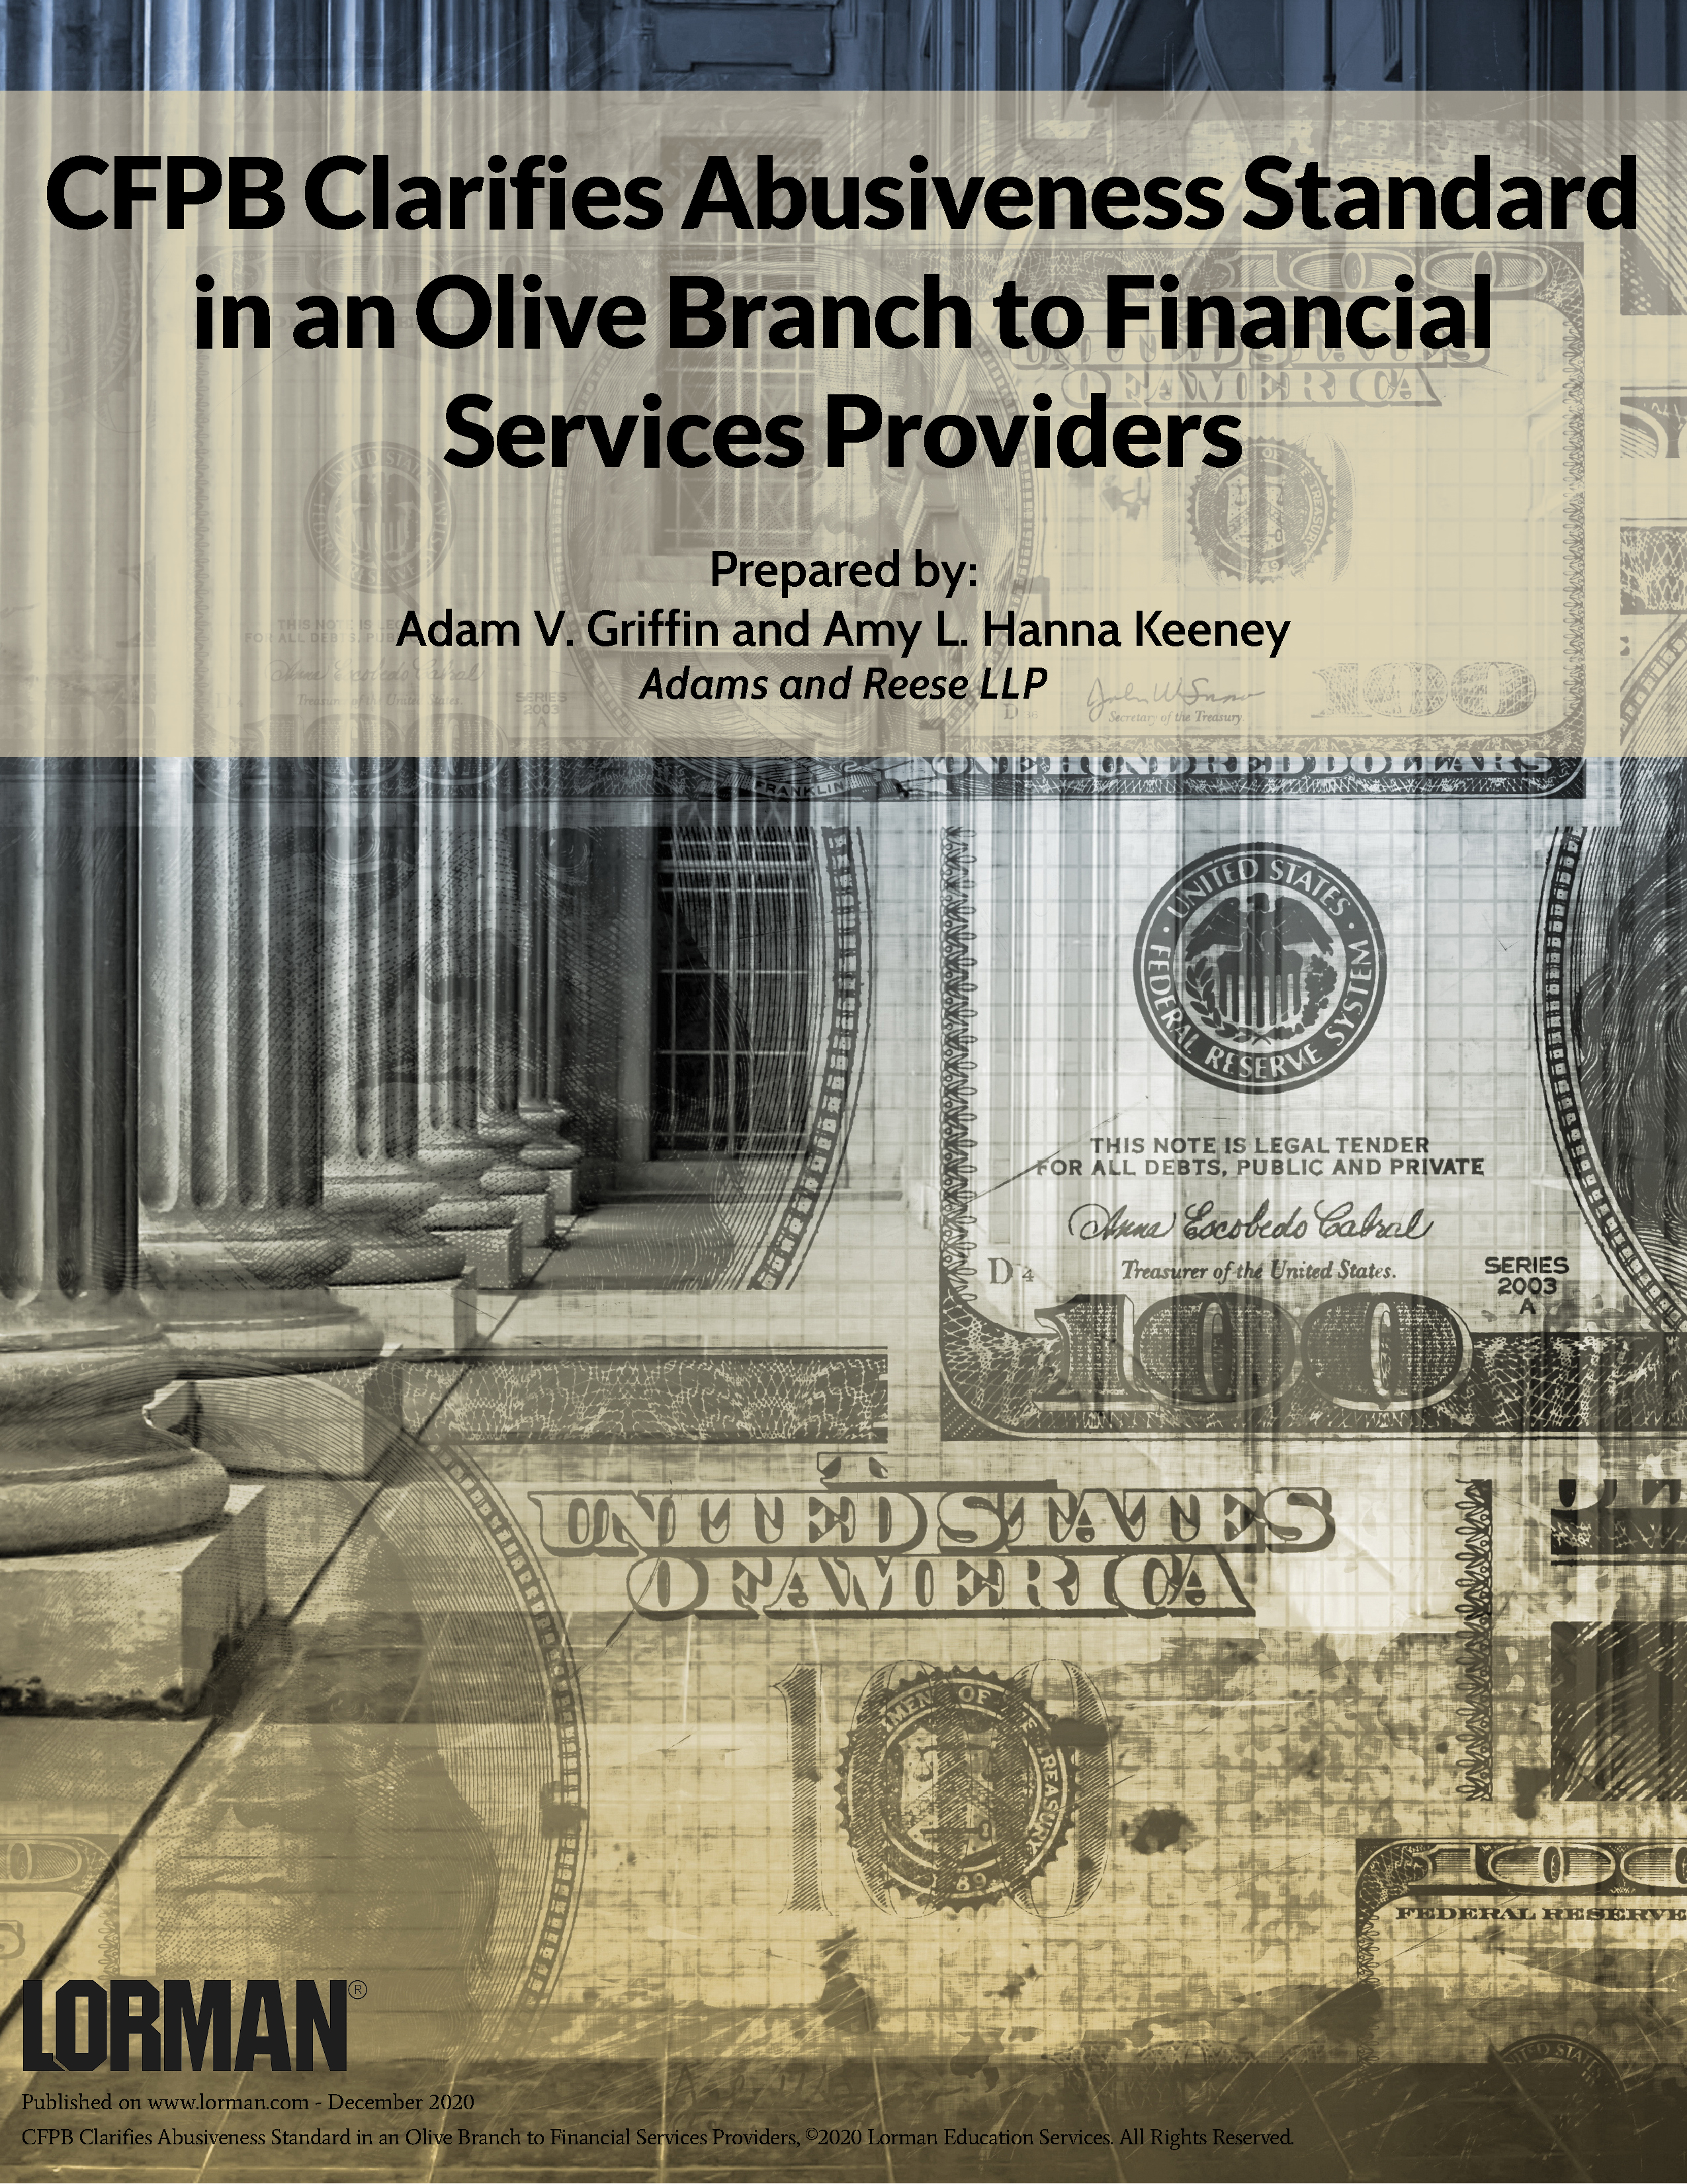 CFPB Clarifies Abusiveness Standard in an Olive Branch to Financial Services Providers